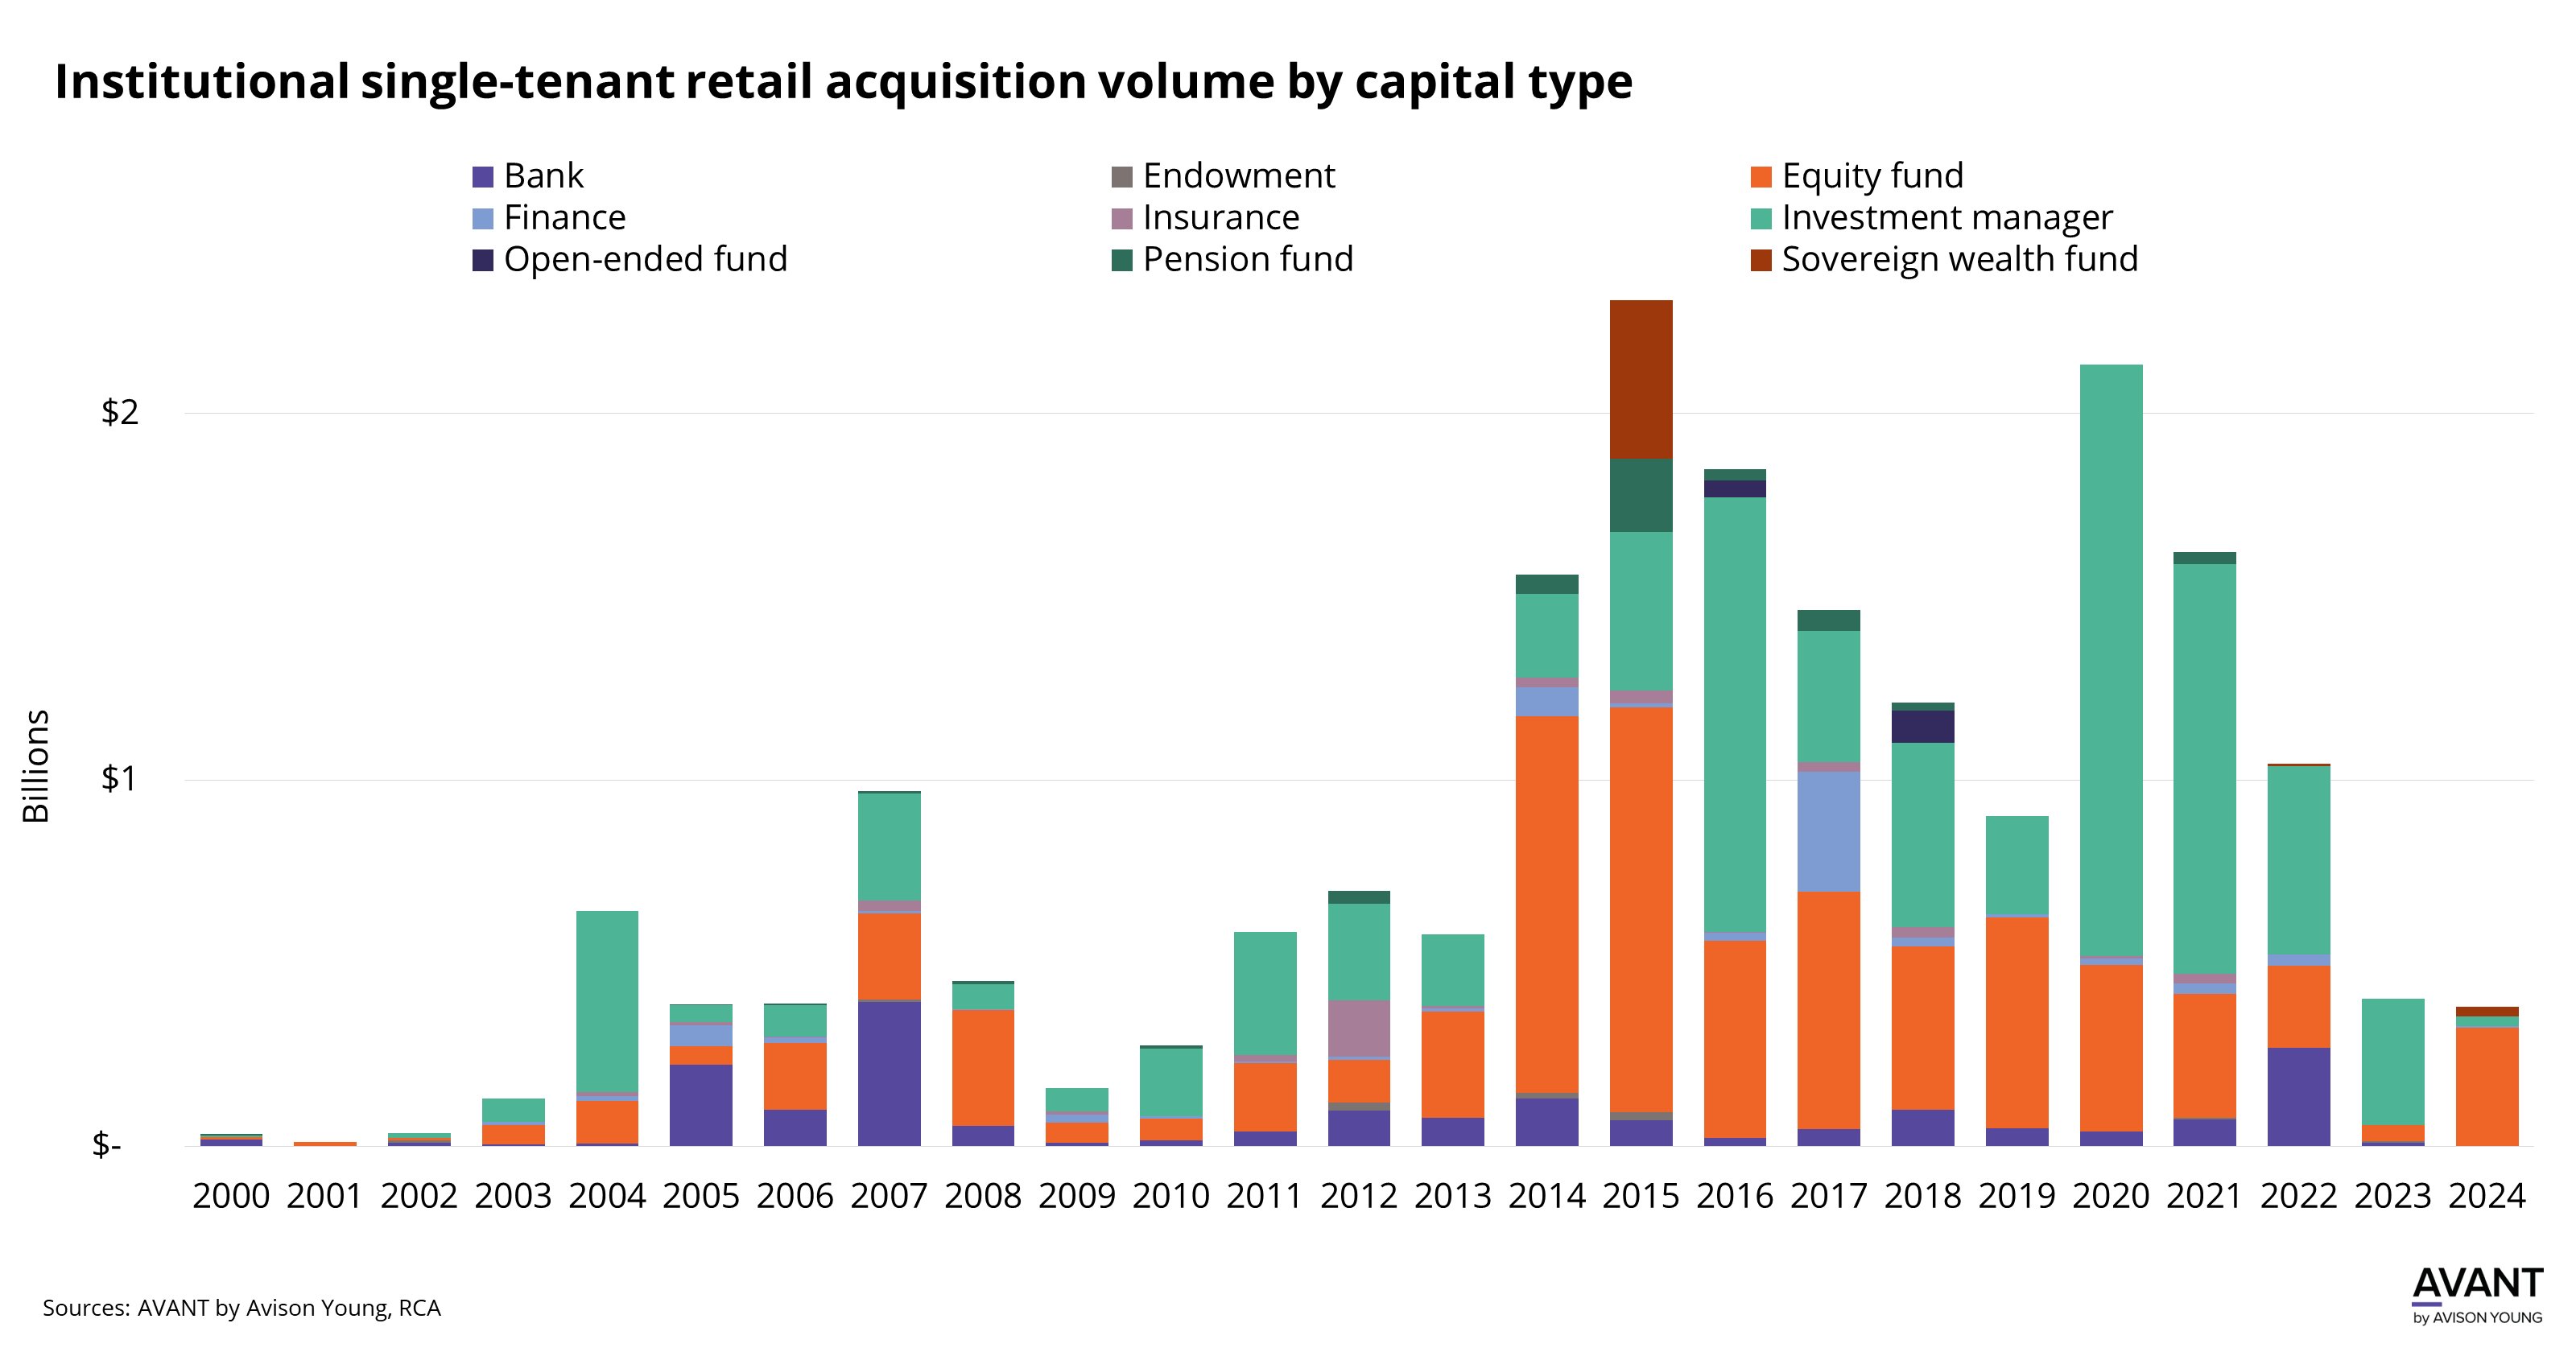 graph of institutional single-tenant retail acquisition volume by capital type from 2000 to 2024 in billions